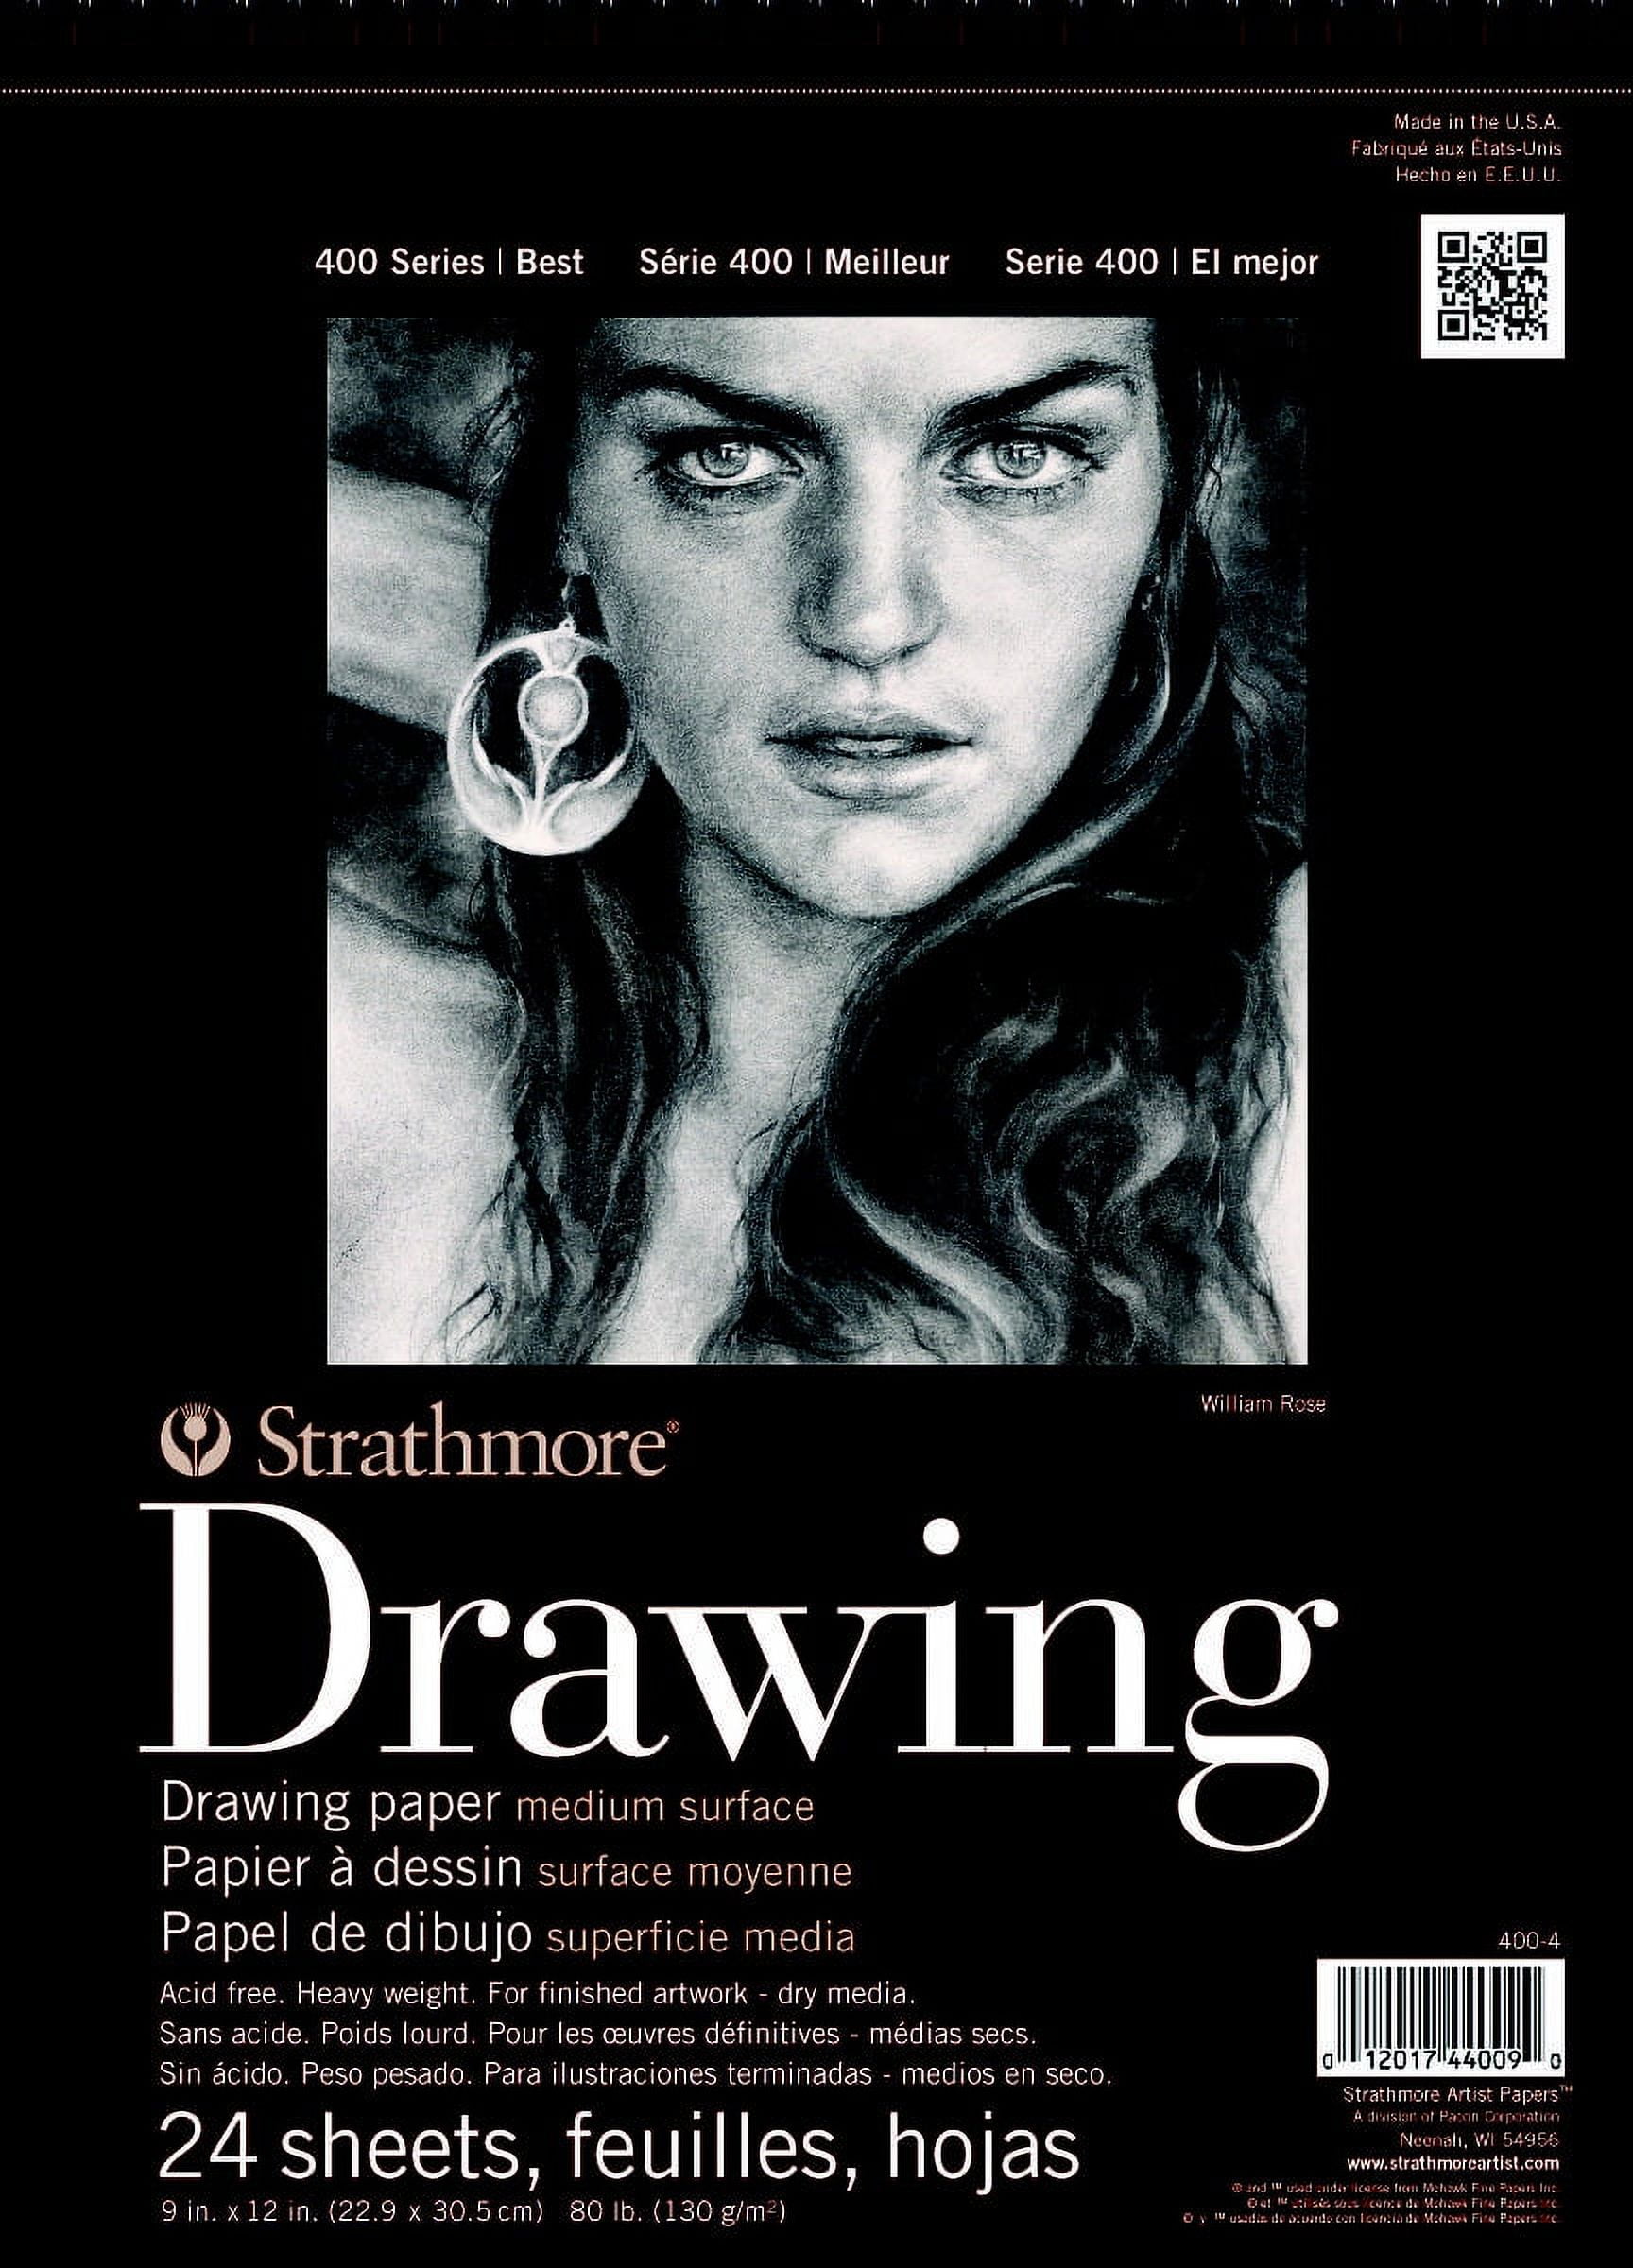 Strathmore 400 Series Drawing Paper Pad 9x12